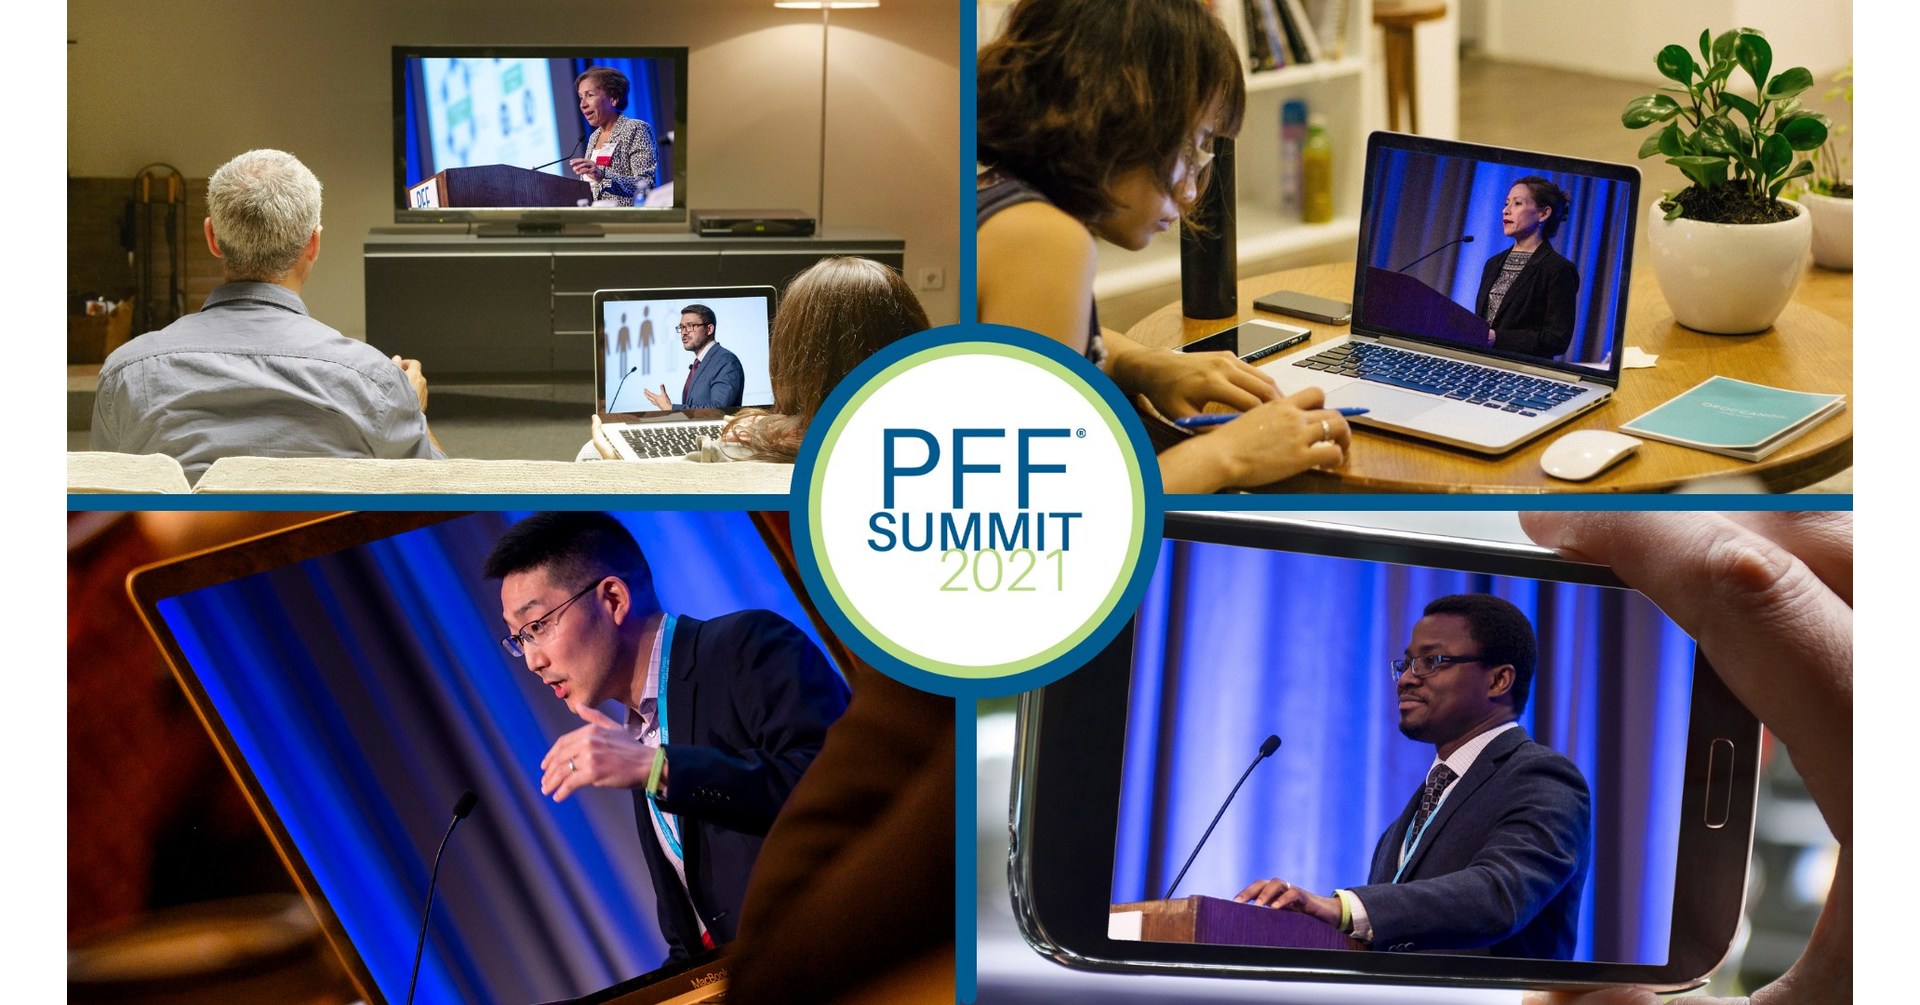 PFF Summit 2021 Achieves Record Attendance, Expands New Therapies